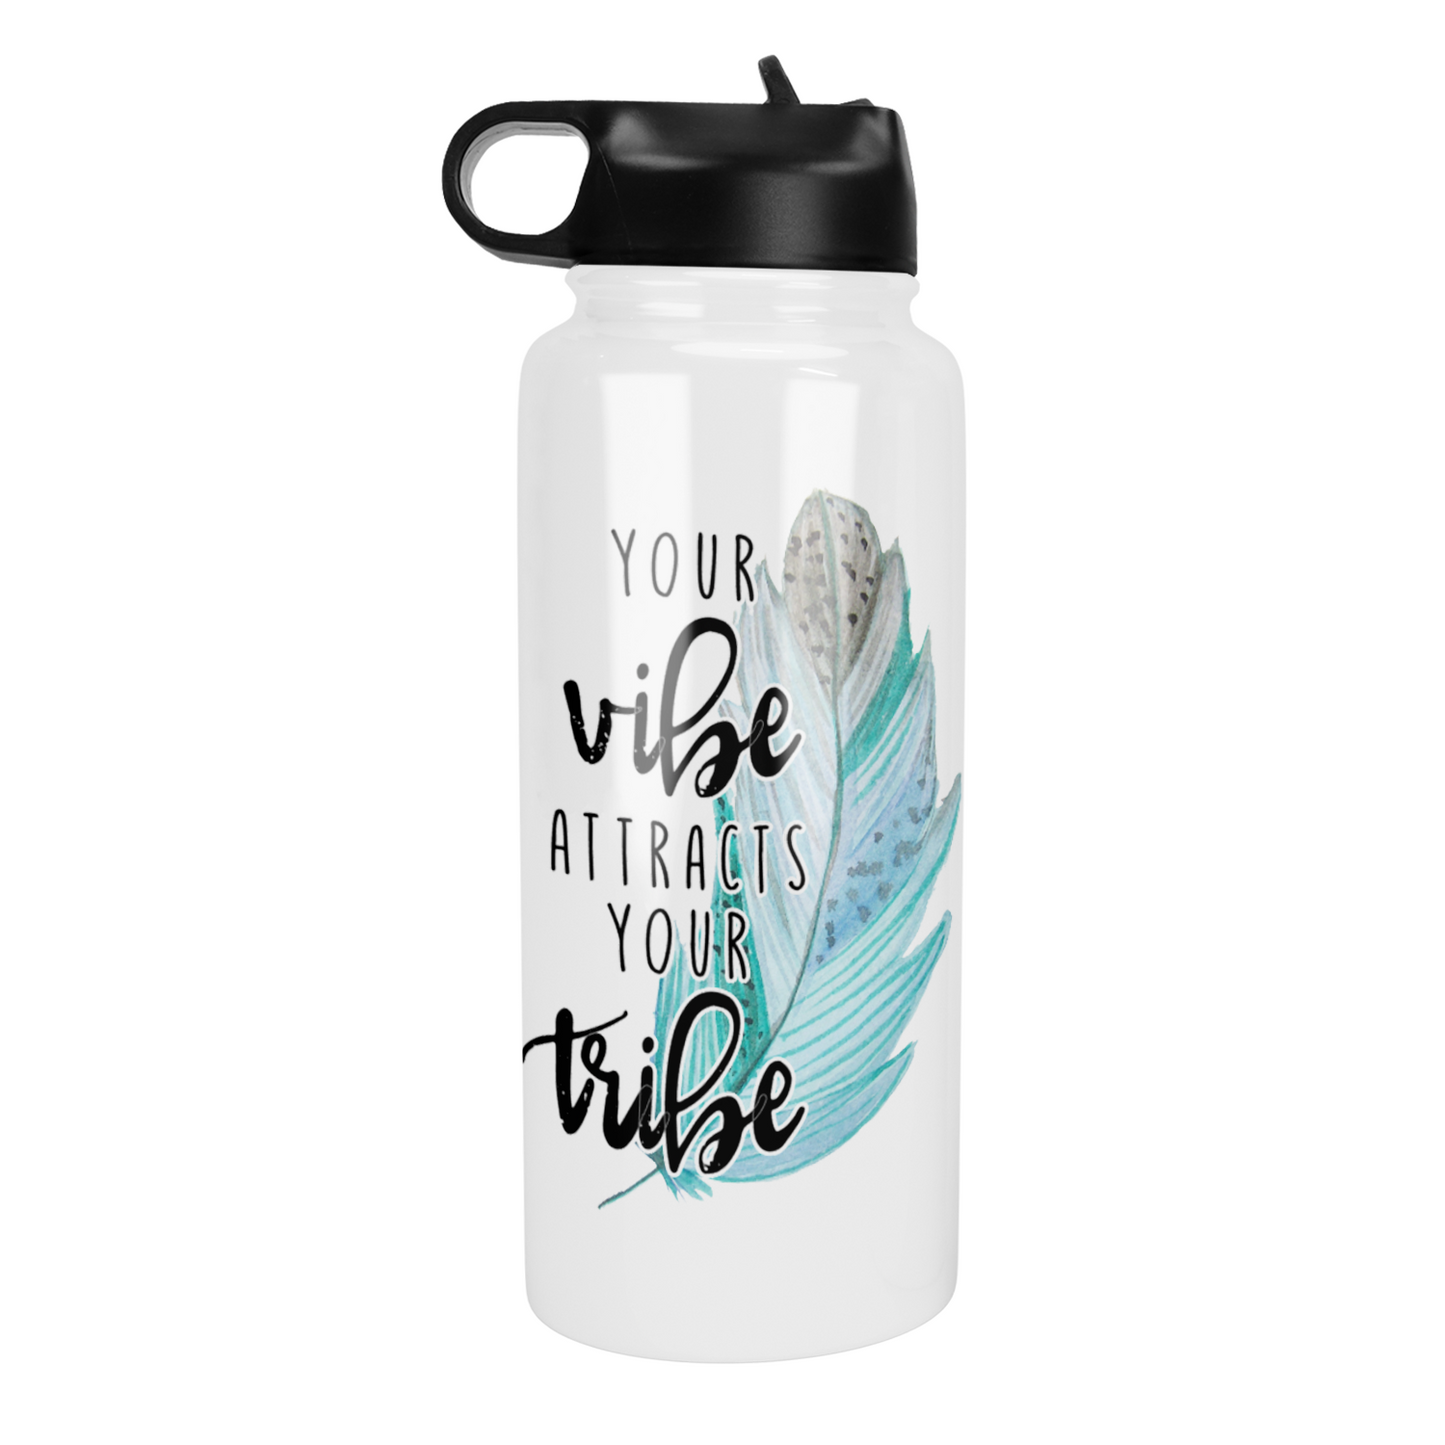 Your Tribe Attracts Your Vibe 32 Oz Waterbottle